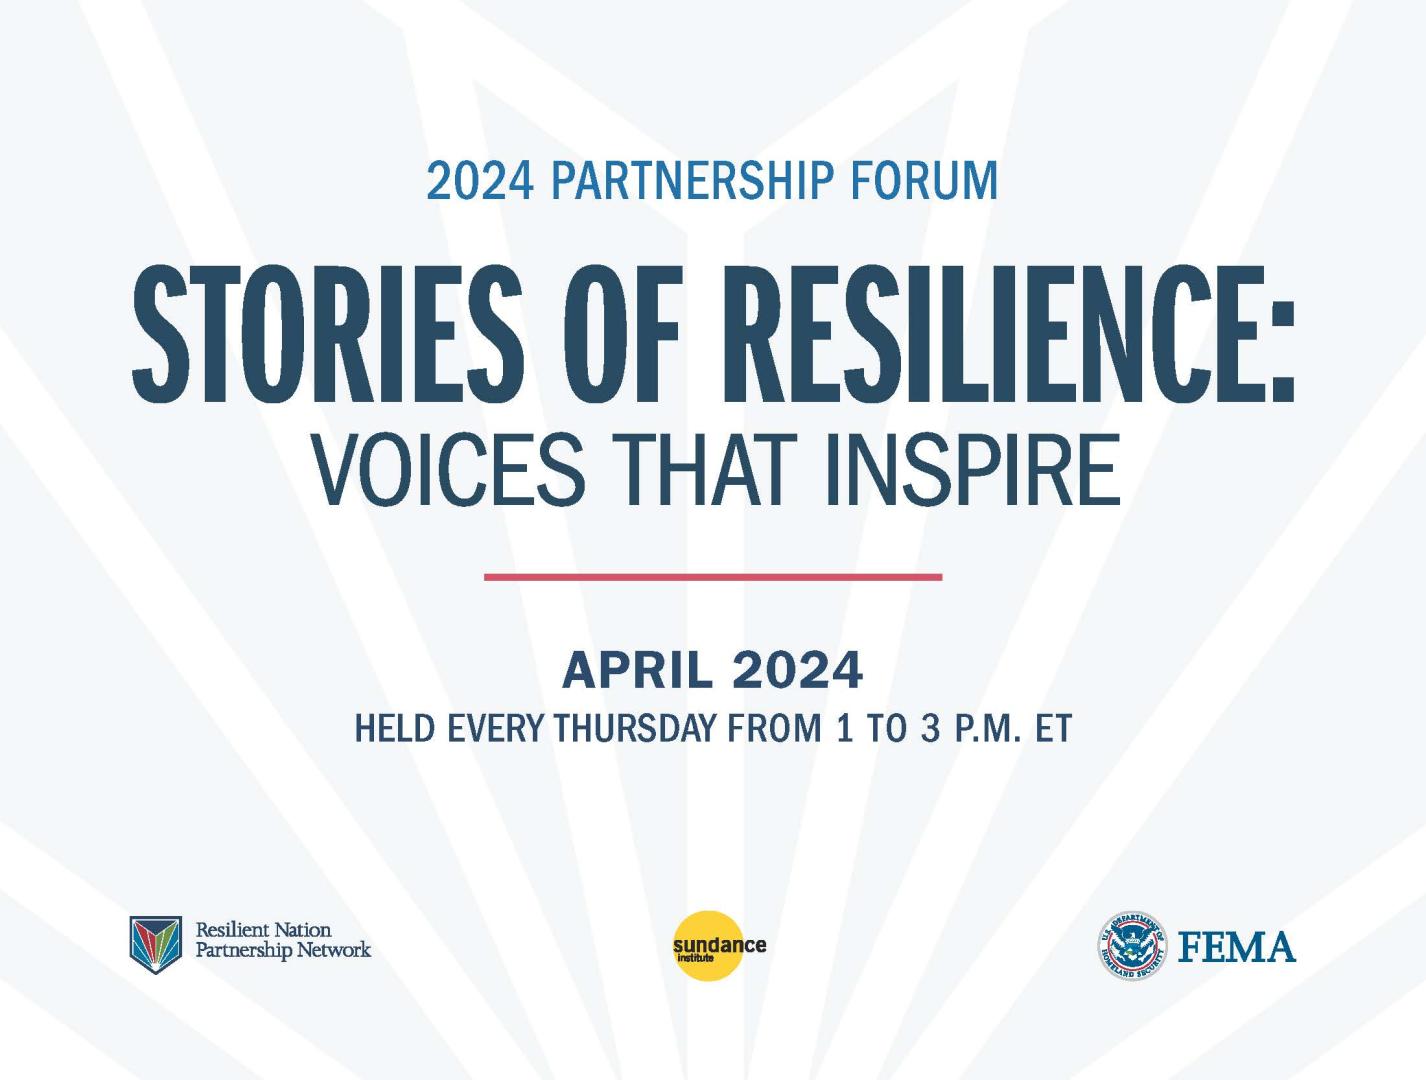 Blue and white graphic with text that says "2024 Partnership Forum Stories of Resilience: Voices that Inspire, April 2024 Held every Thursday from 1 to 3 p.m. ET"